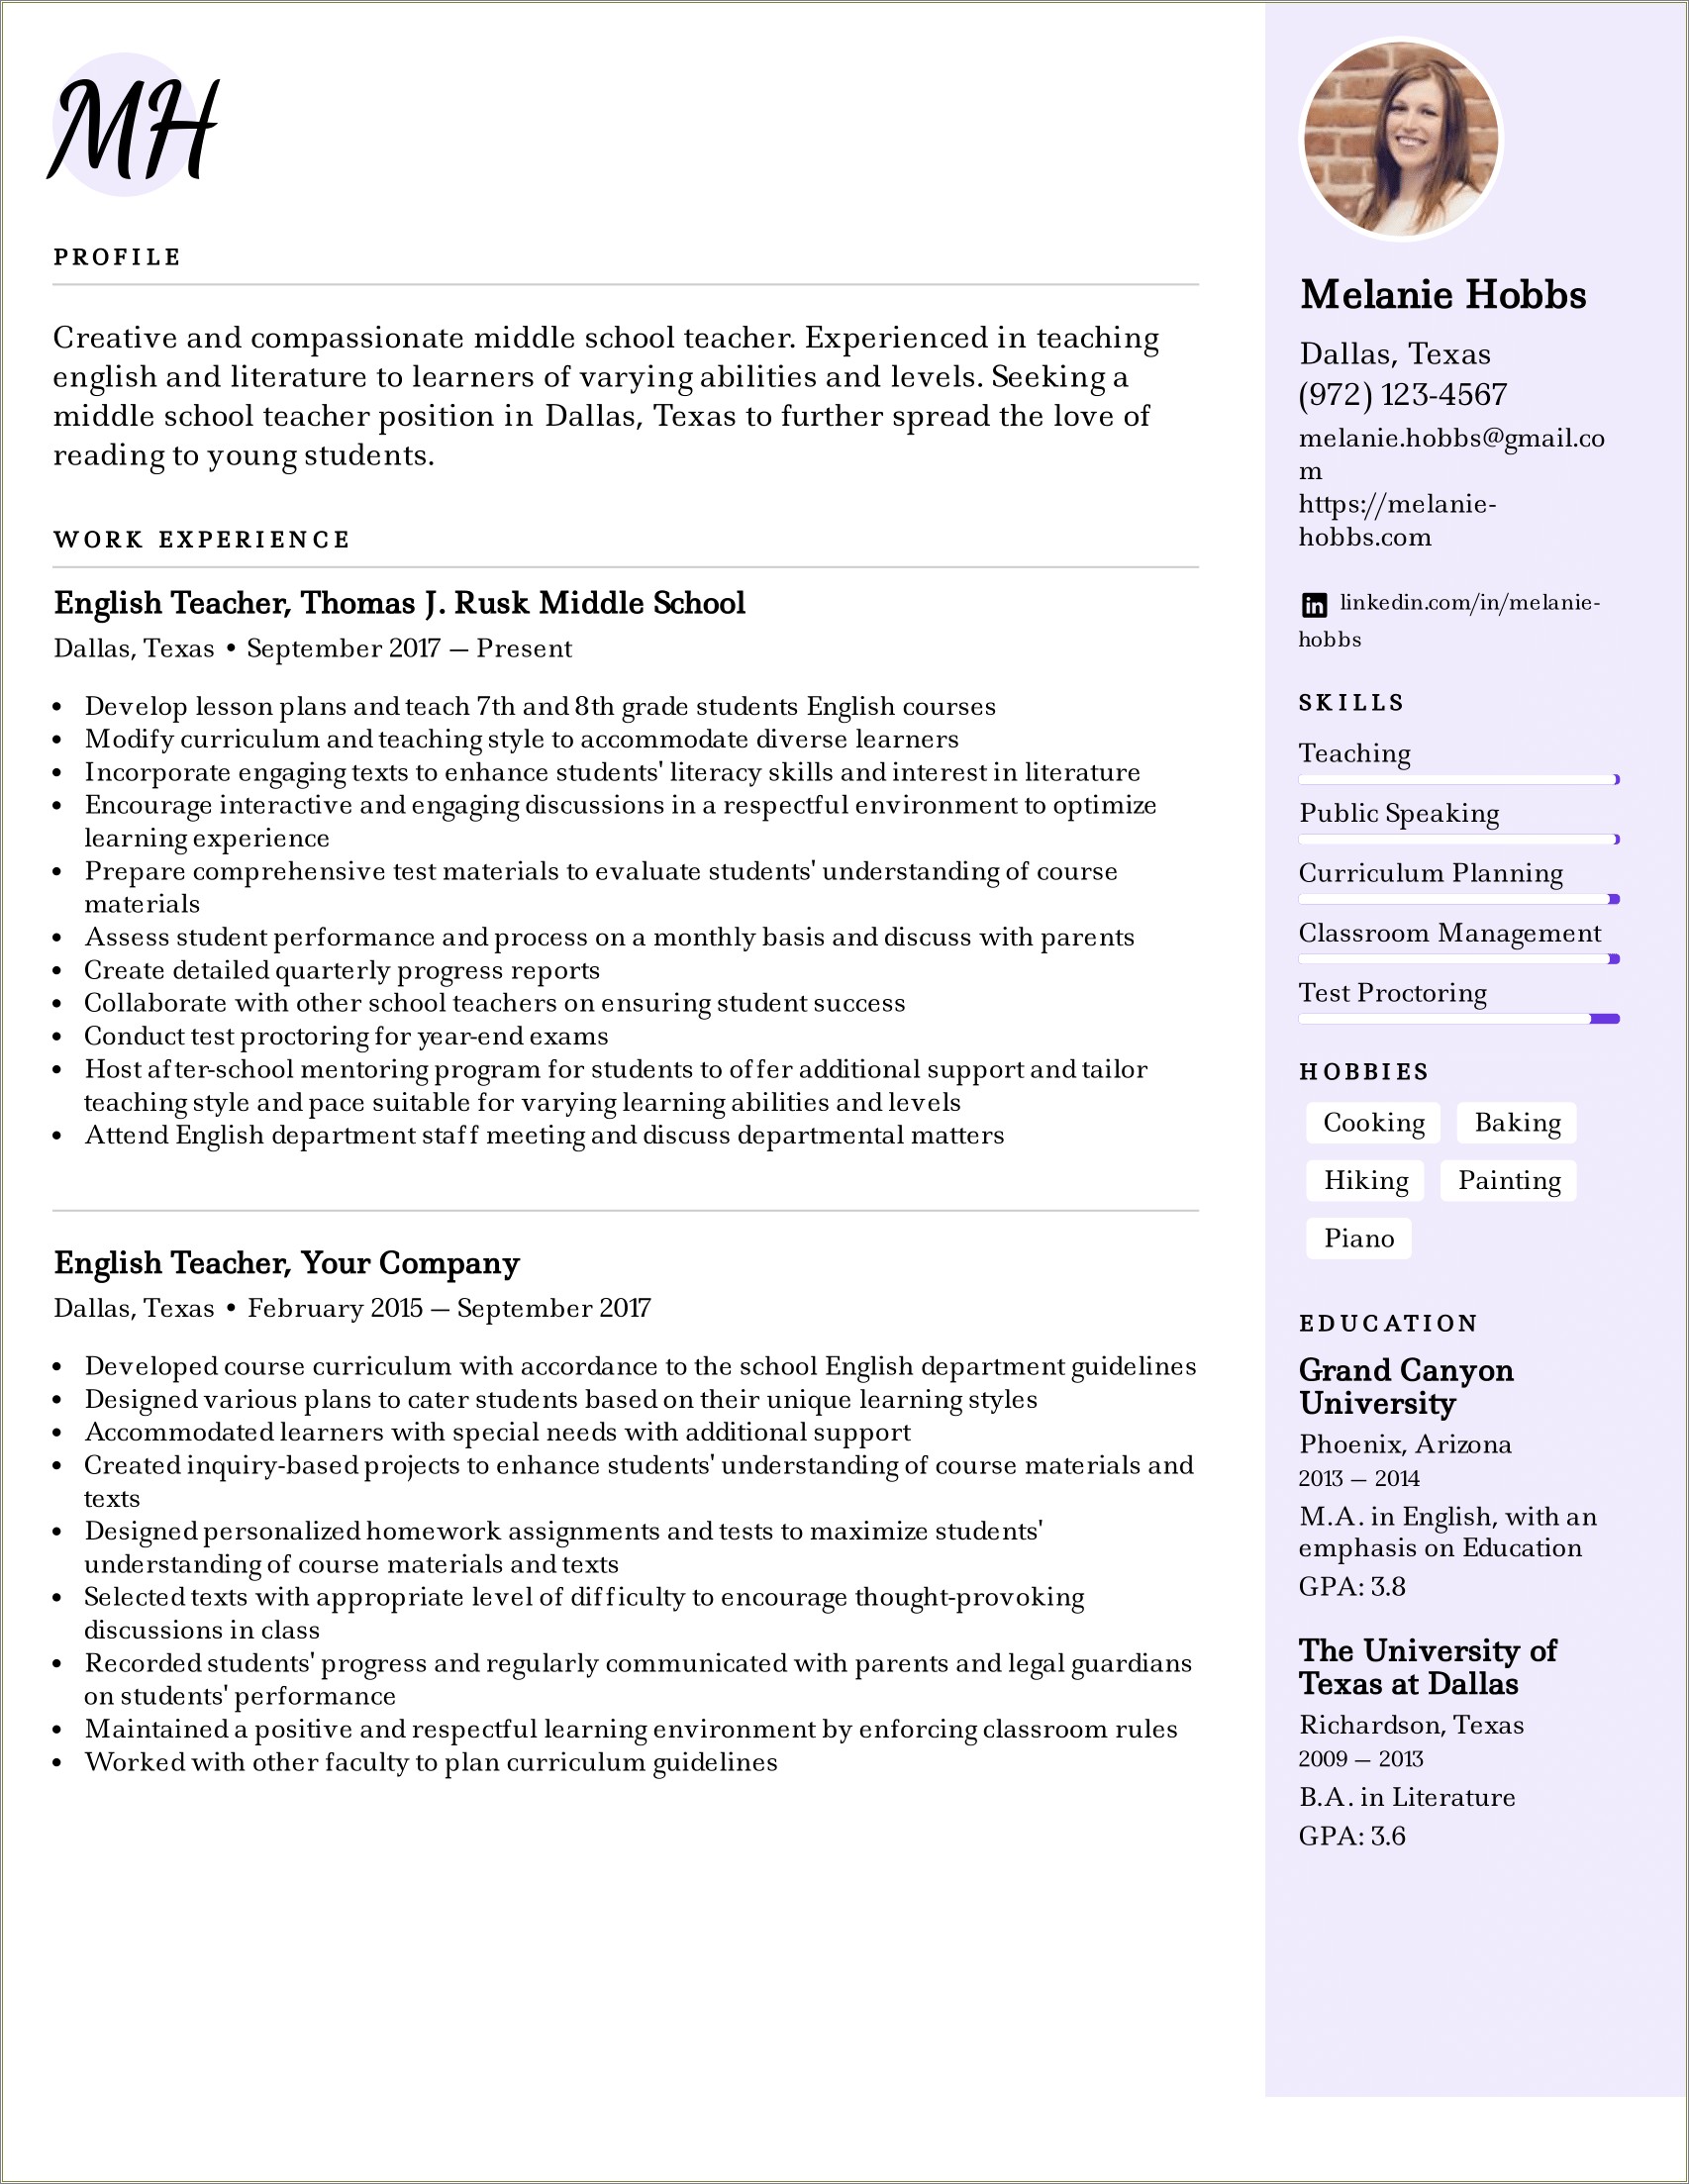 printable-resume-template-for-high-school-students-resume-example-gallery